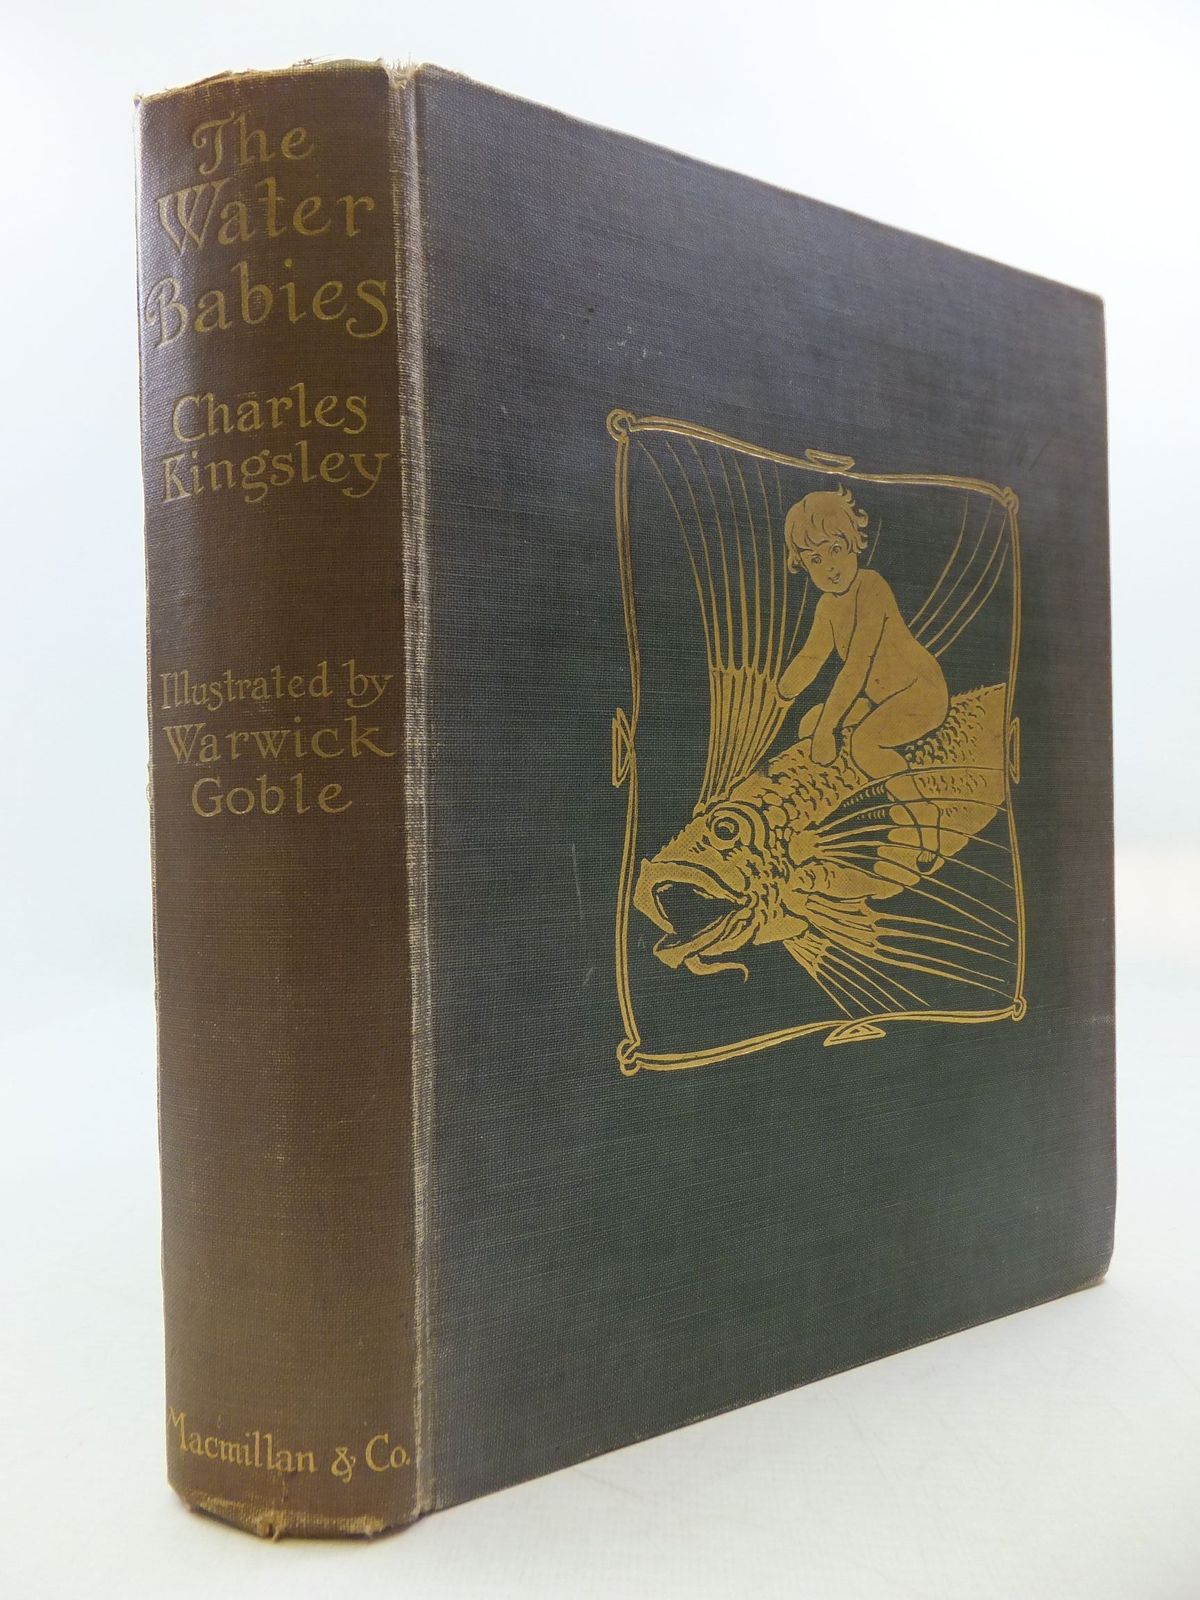 Photo of THE WATER-BABIES written by Kingsley, Charles illustrated by Goble, Warwick published by Macmillan & Co. Ltd. (STOCK CODE: 2112052)  for sale by Stella & Rose's Books